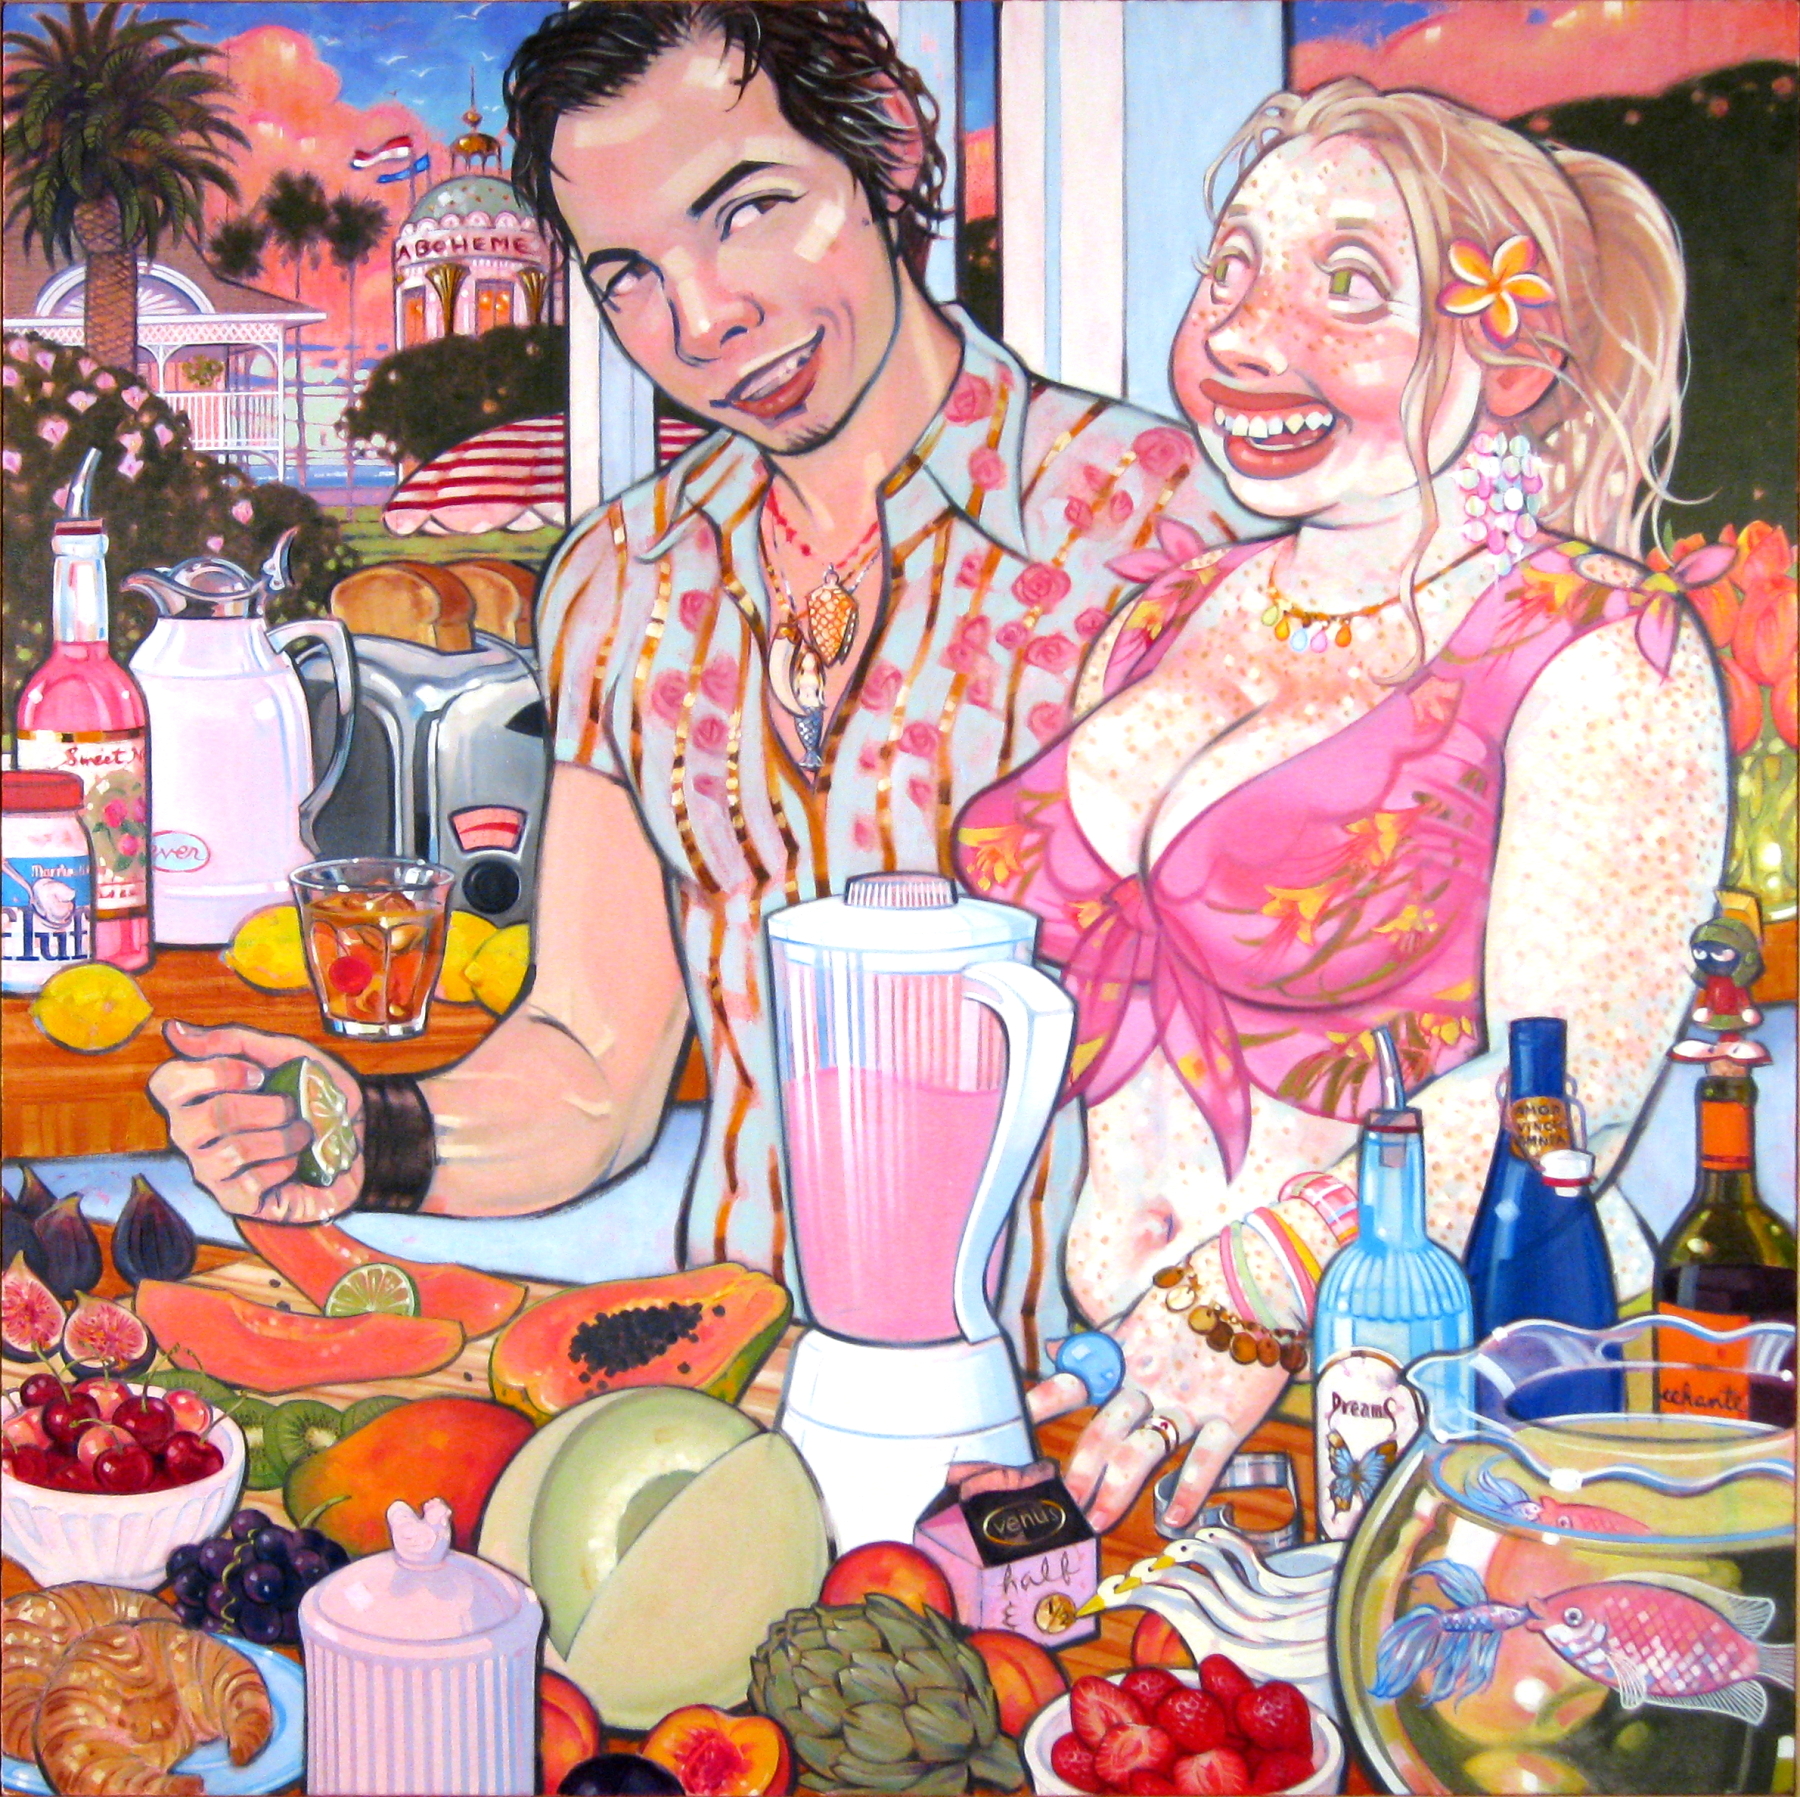 Blender, 2004, courtesy of Ray Griffin and Thom Robinson, oil on canvas, 48 x 48 inches, by Taiyo la Paix